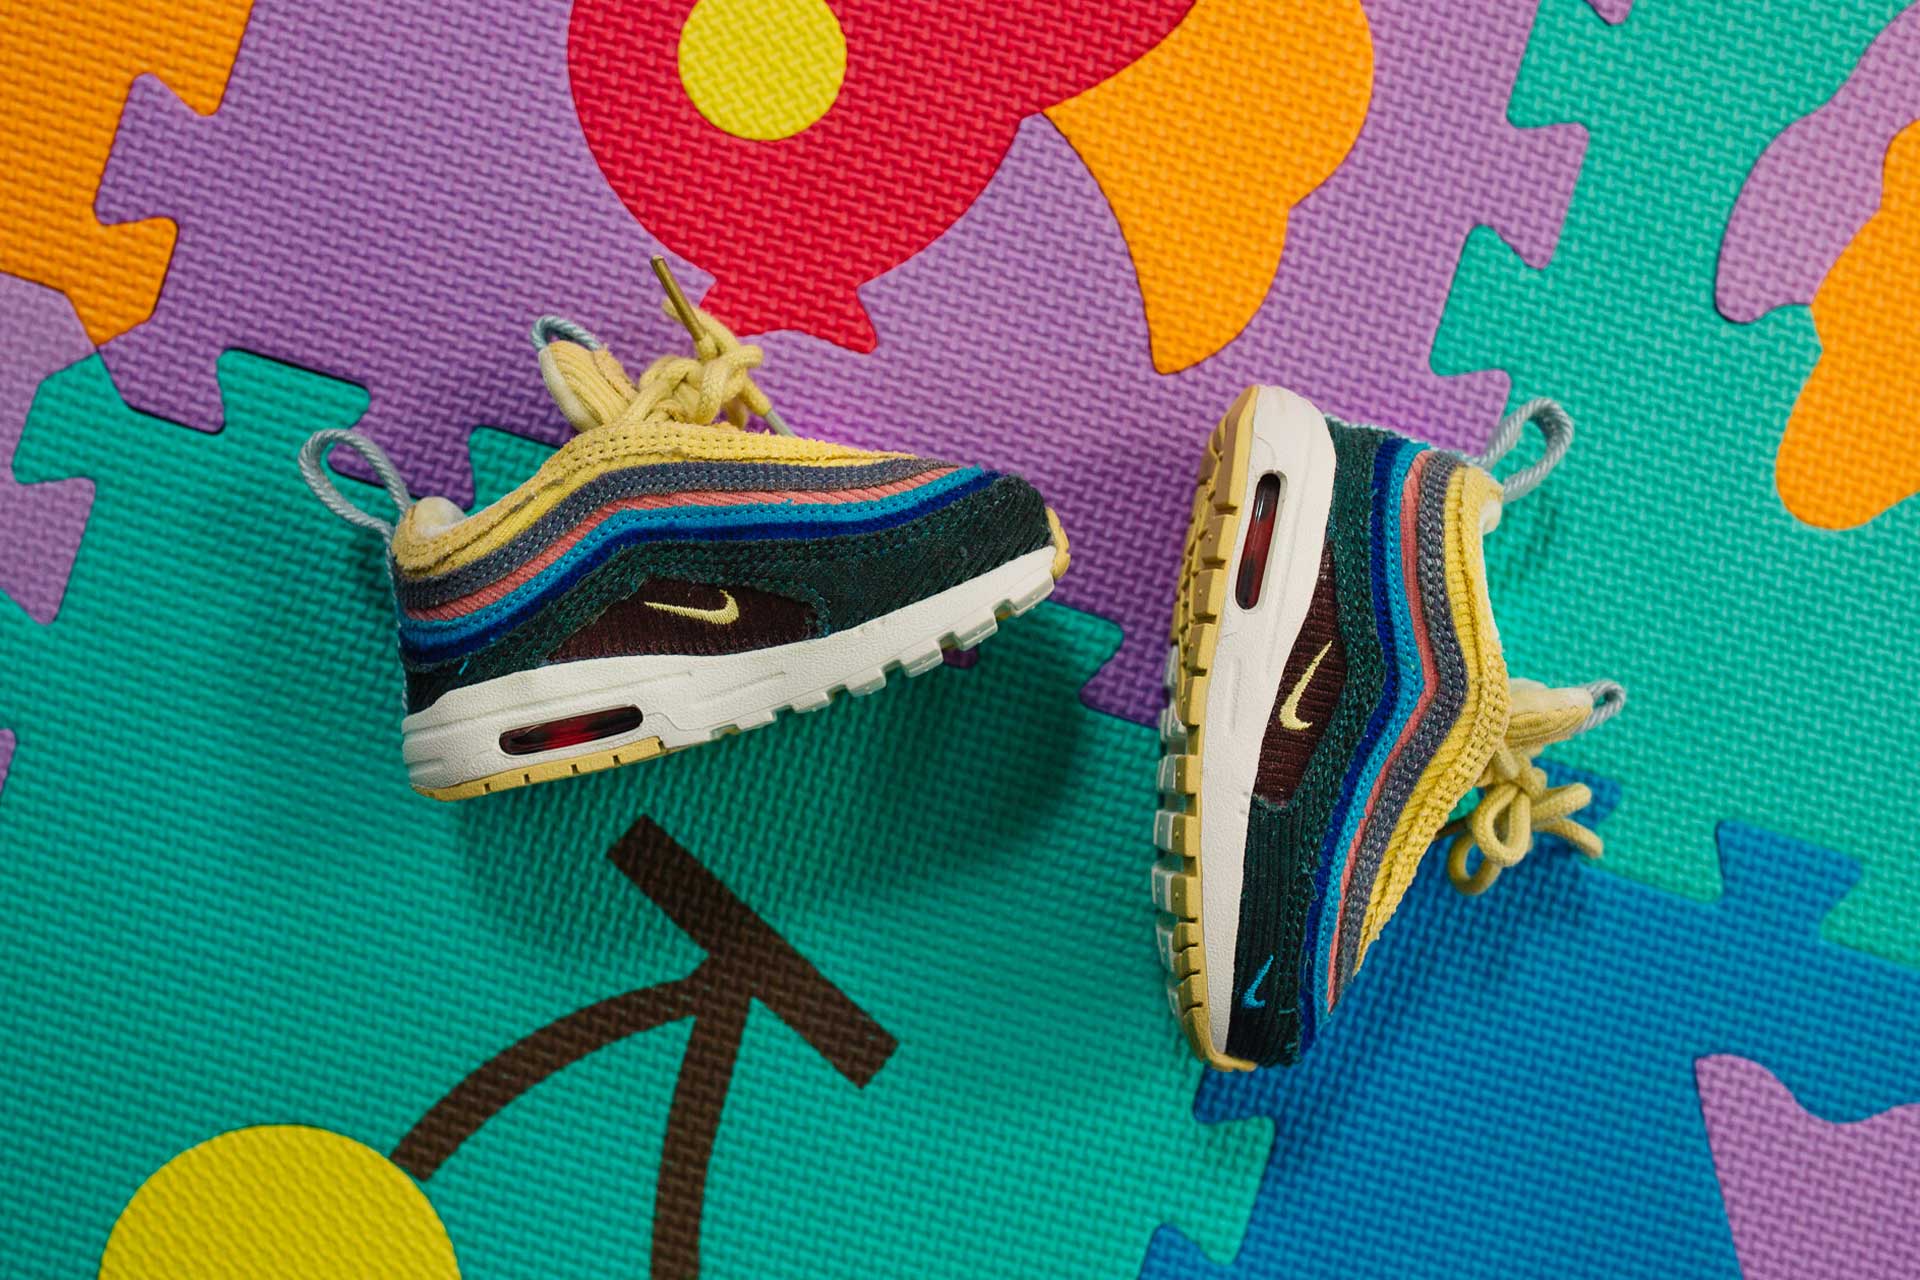 sean wotherspoon all accessories